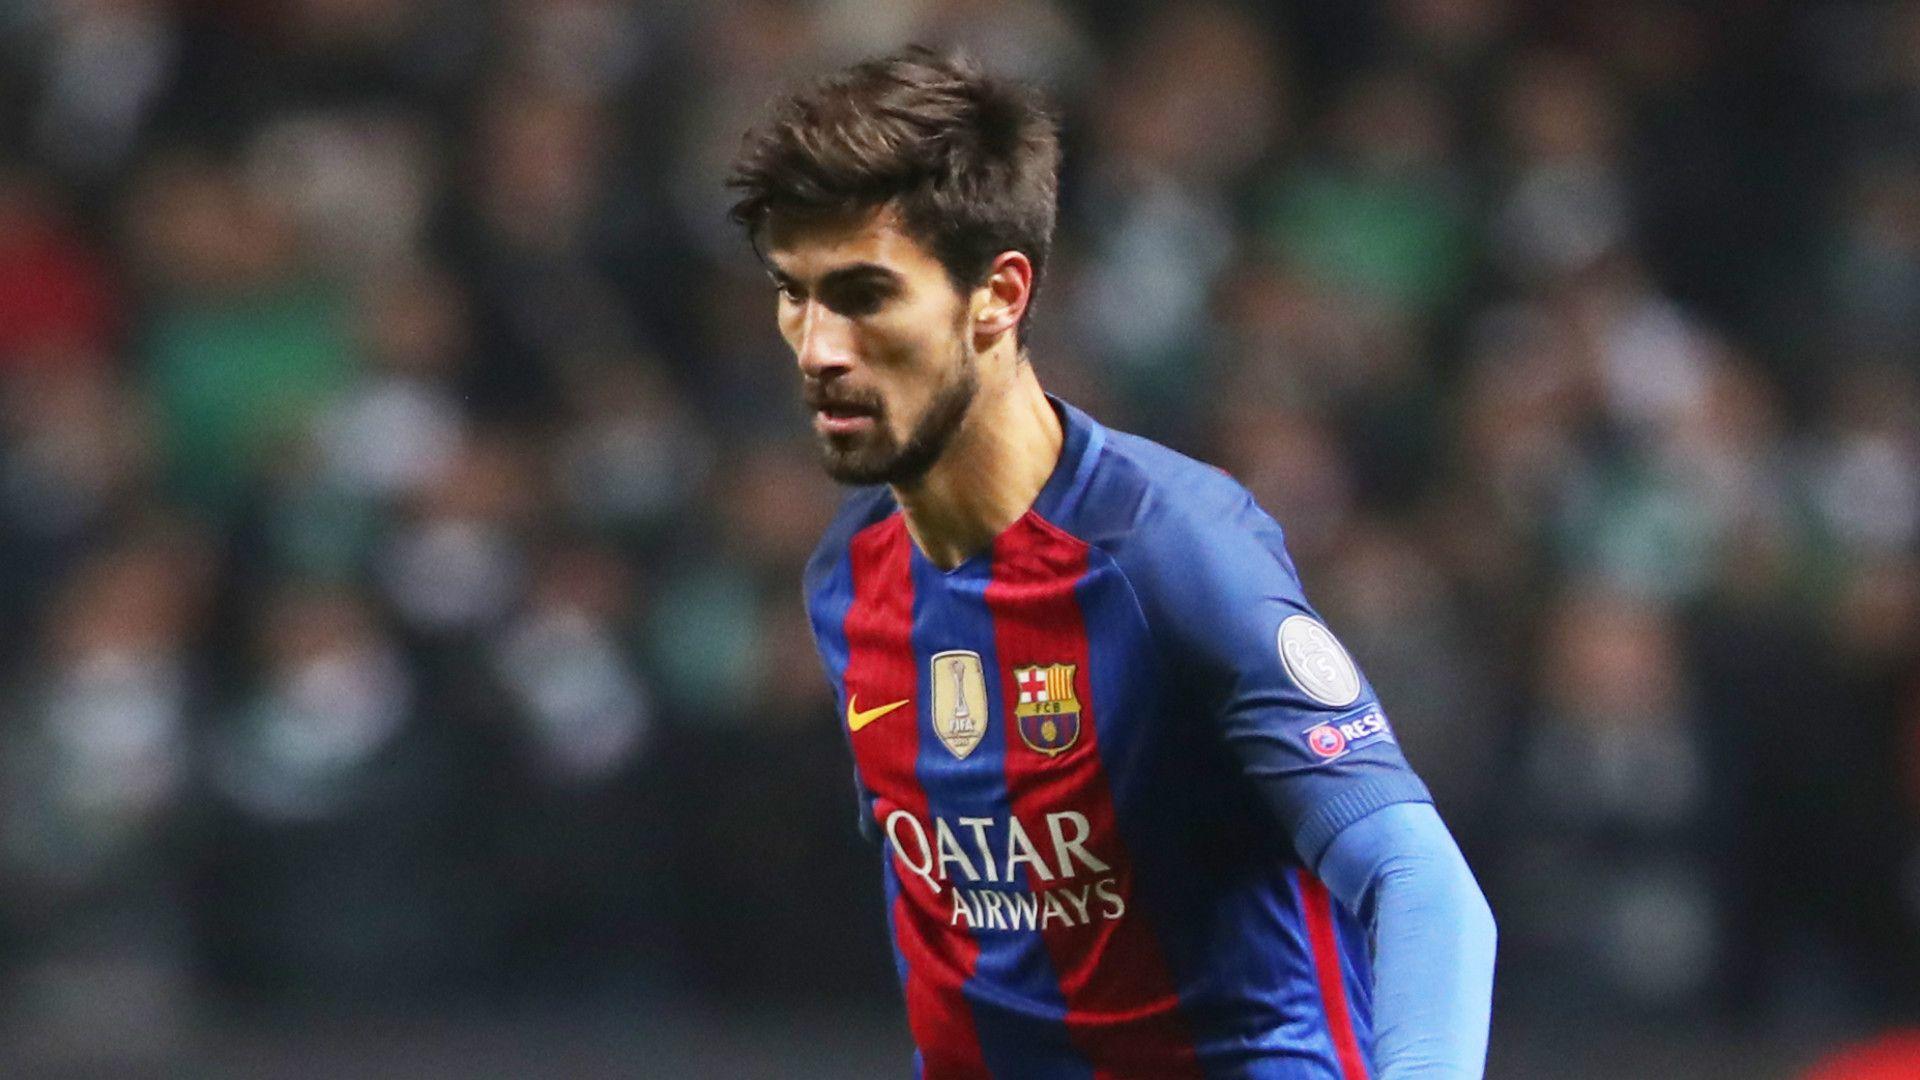 The surprise name in Barca XI is Portuguese midfielder Andre Gomes